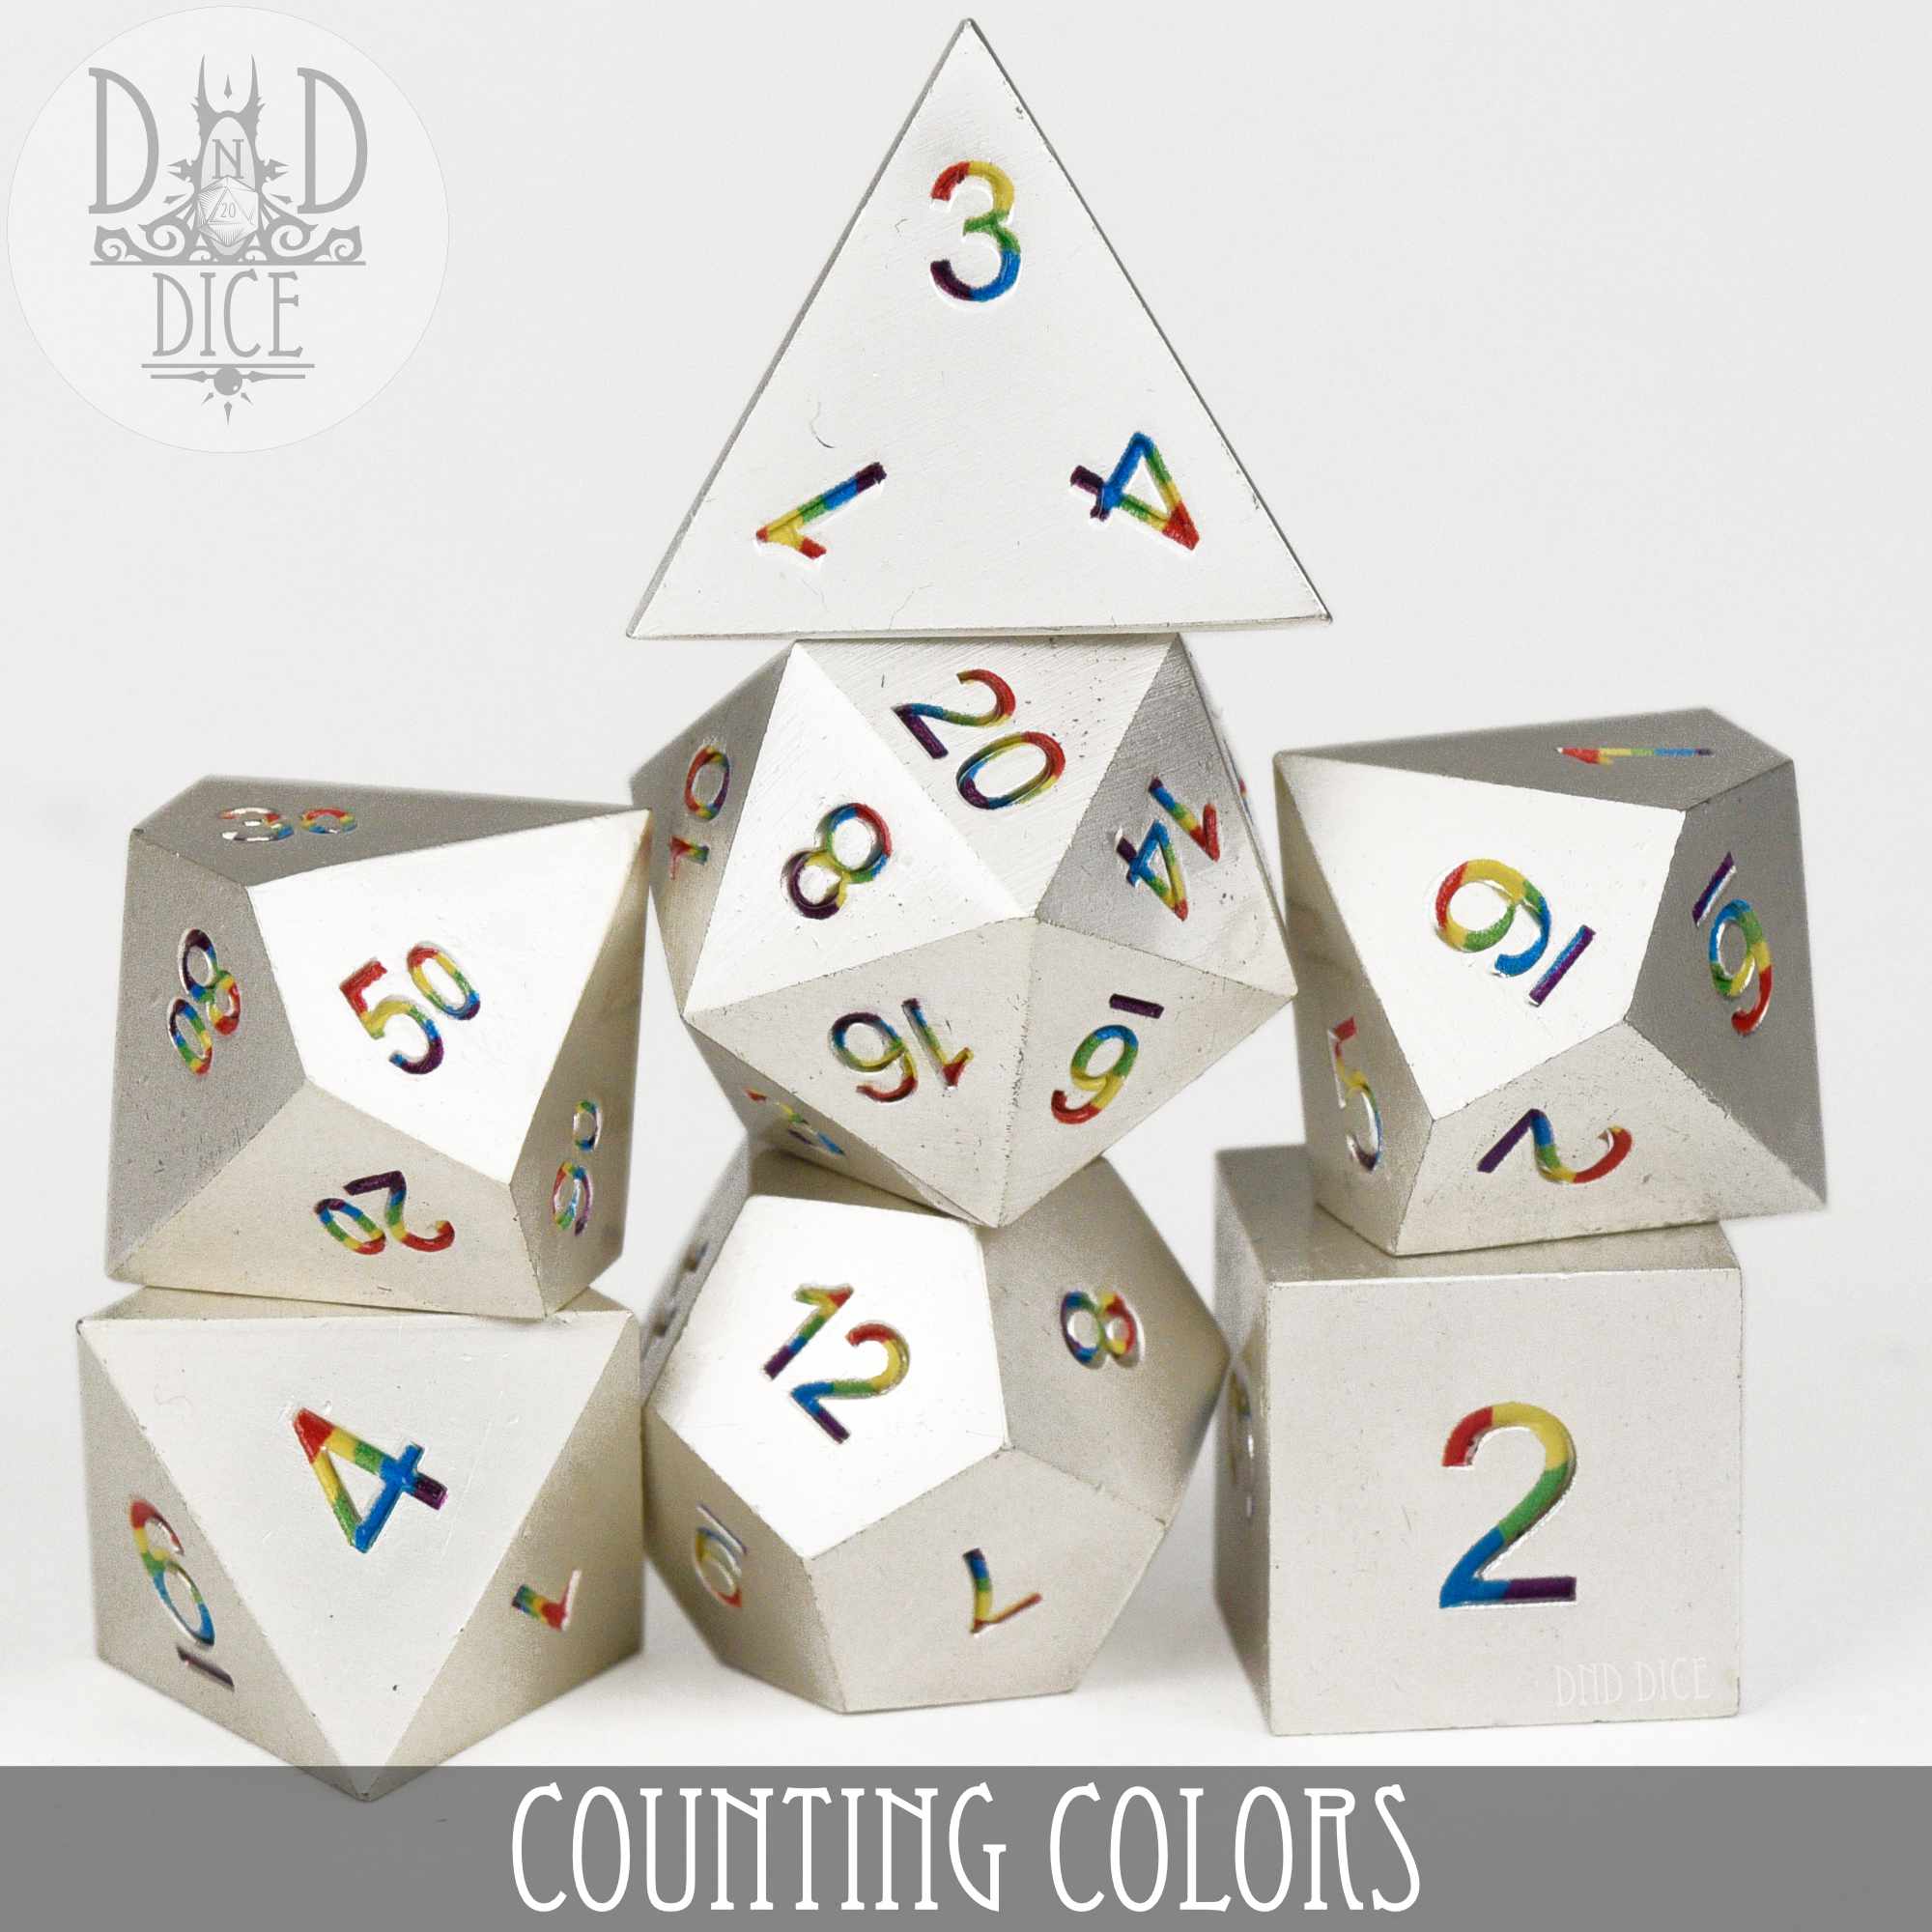 Counting Colors (Metal)